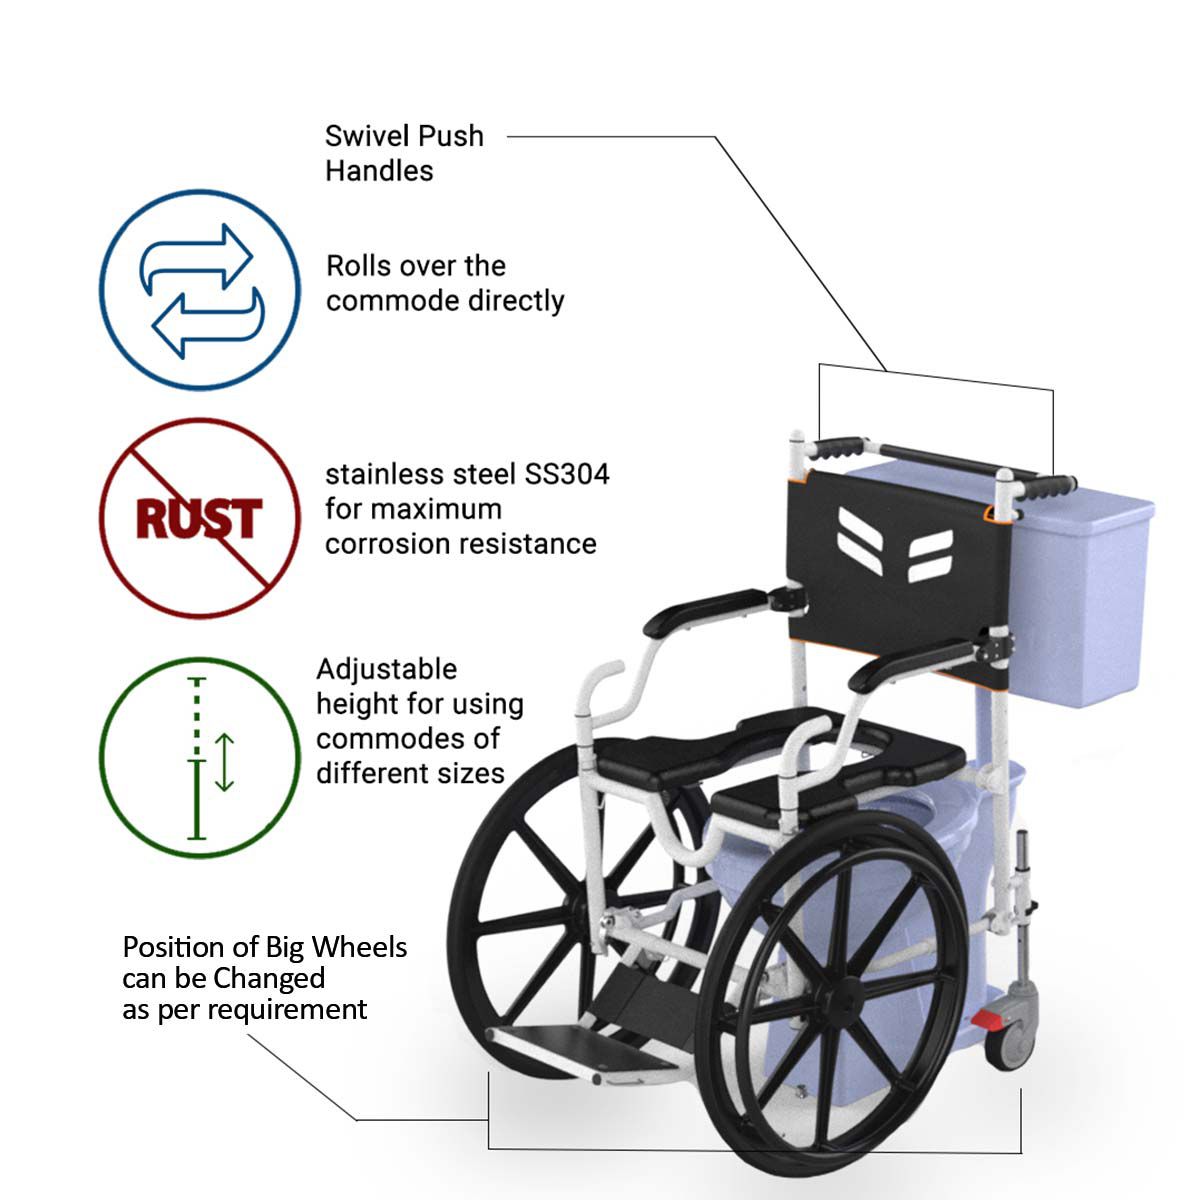 Frido GO Self Propelled Wheelchair | Travel and Shower Commode Wheelchair